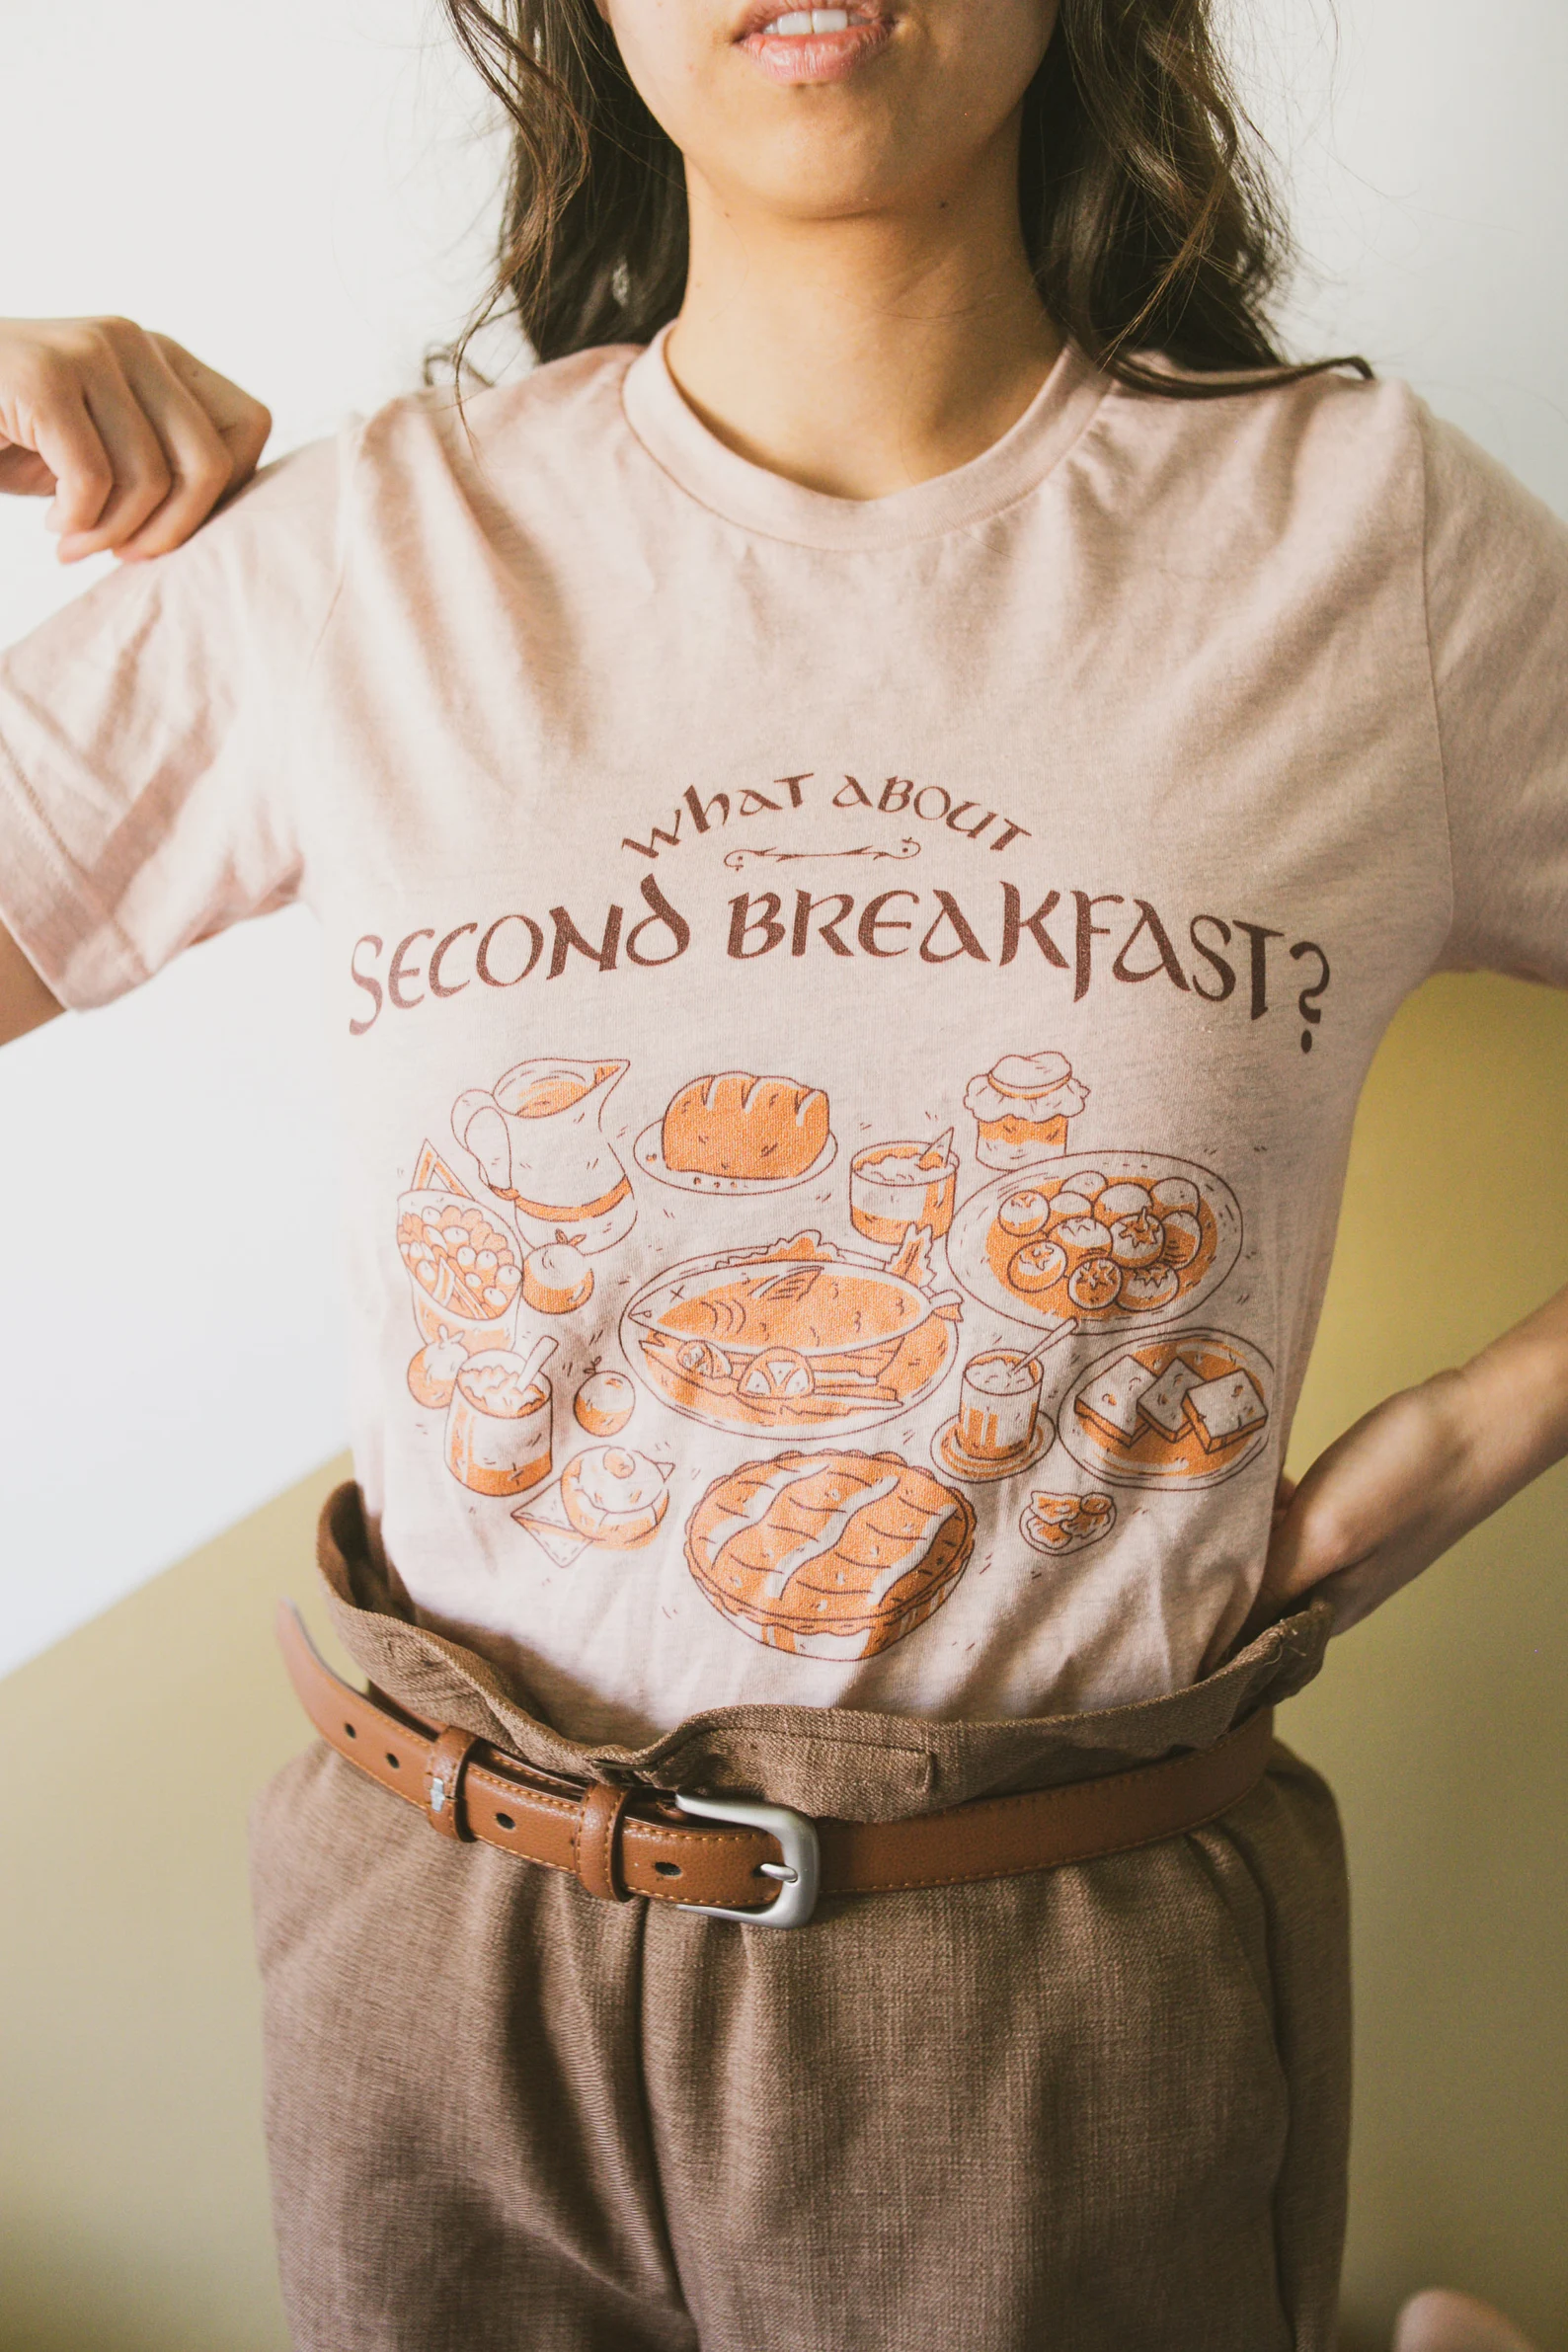 A cream colored t-shirt that reads "What about second breakfast?" and illustrations of cozy breakfast foods